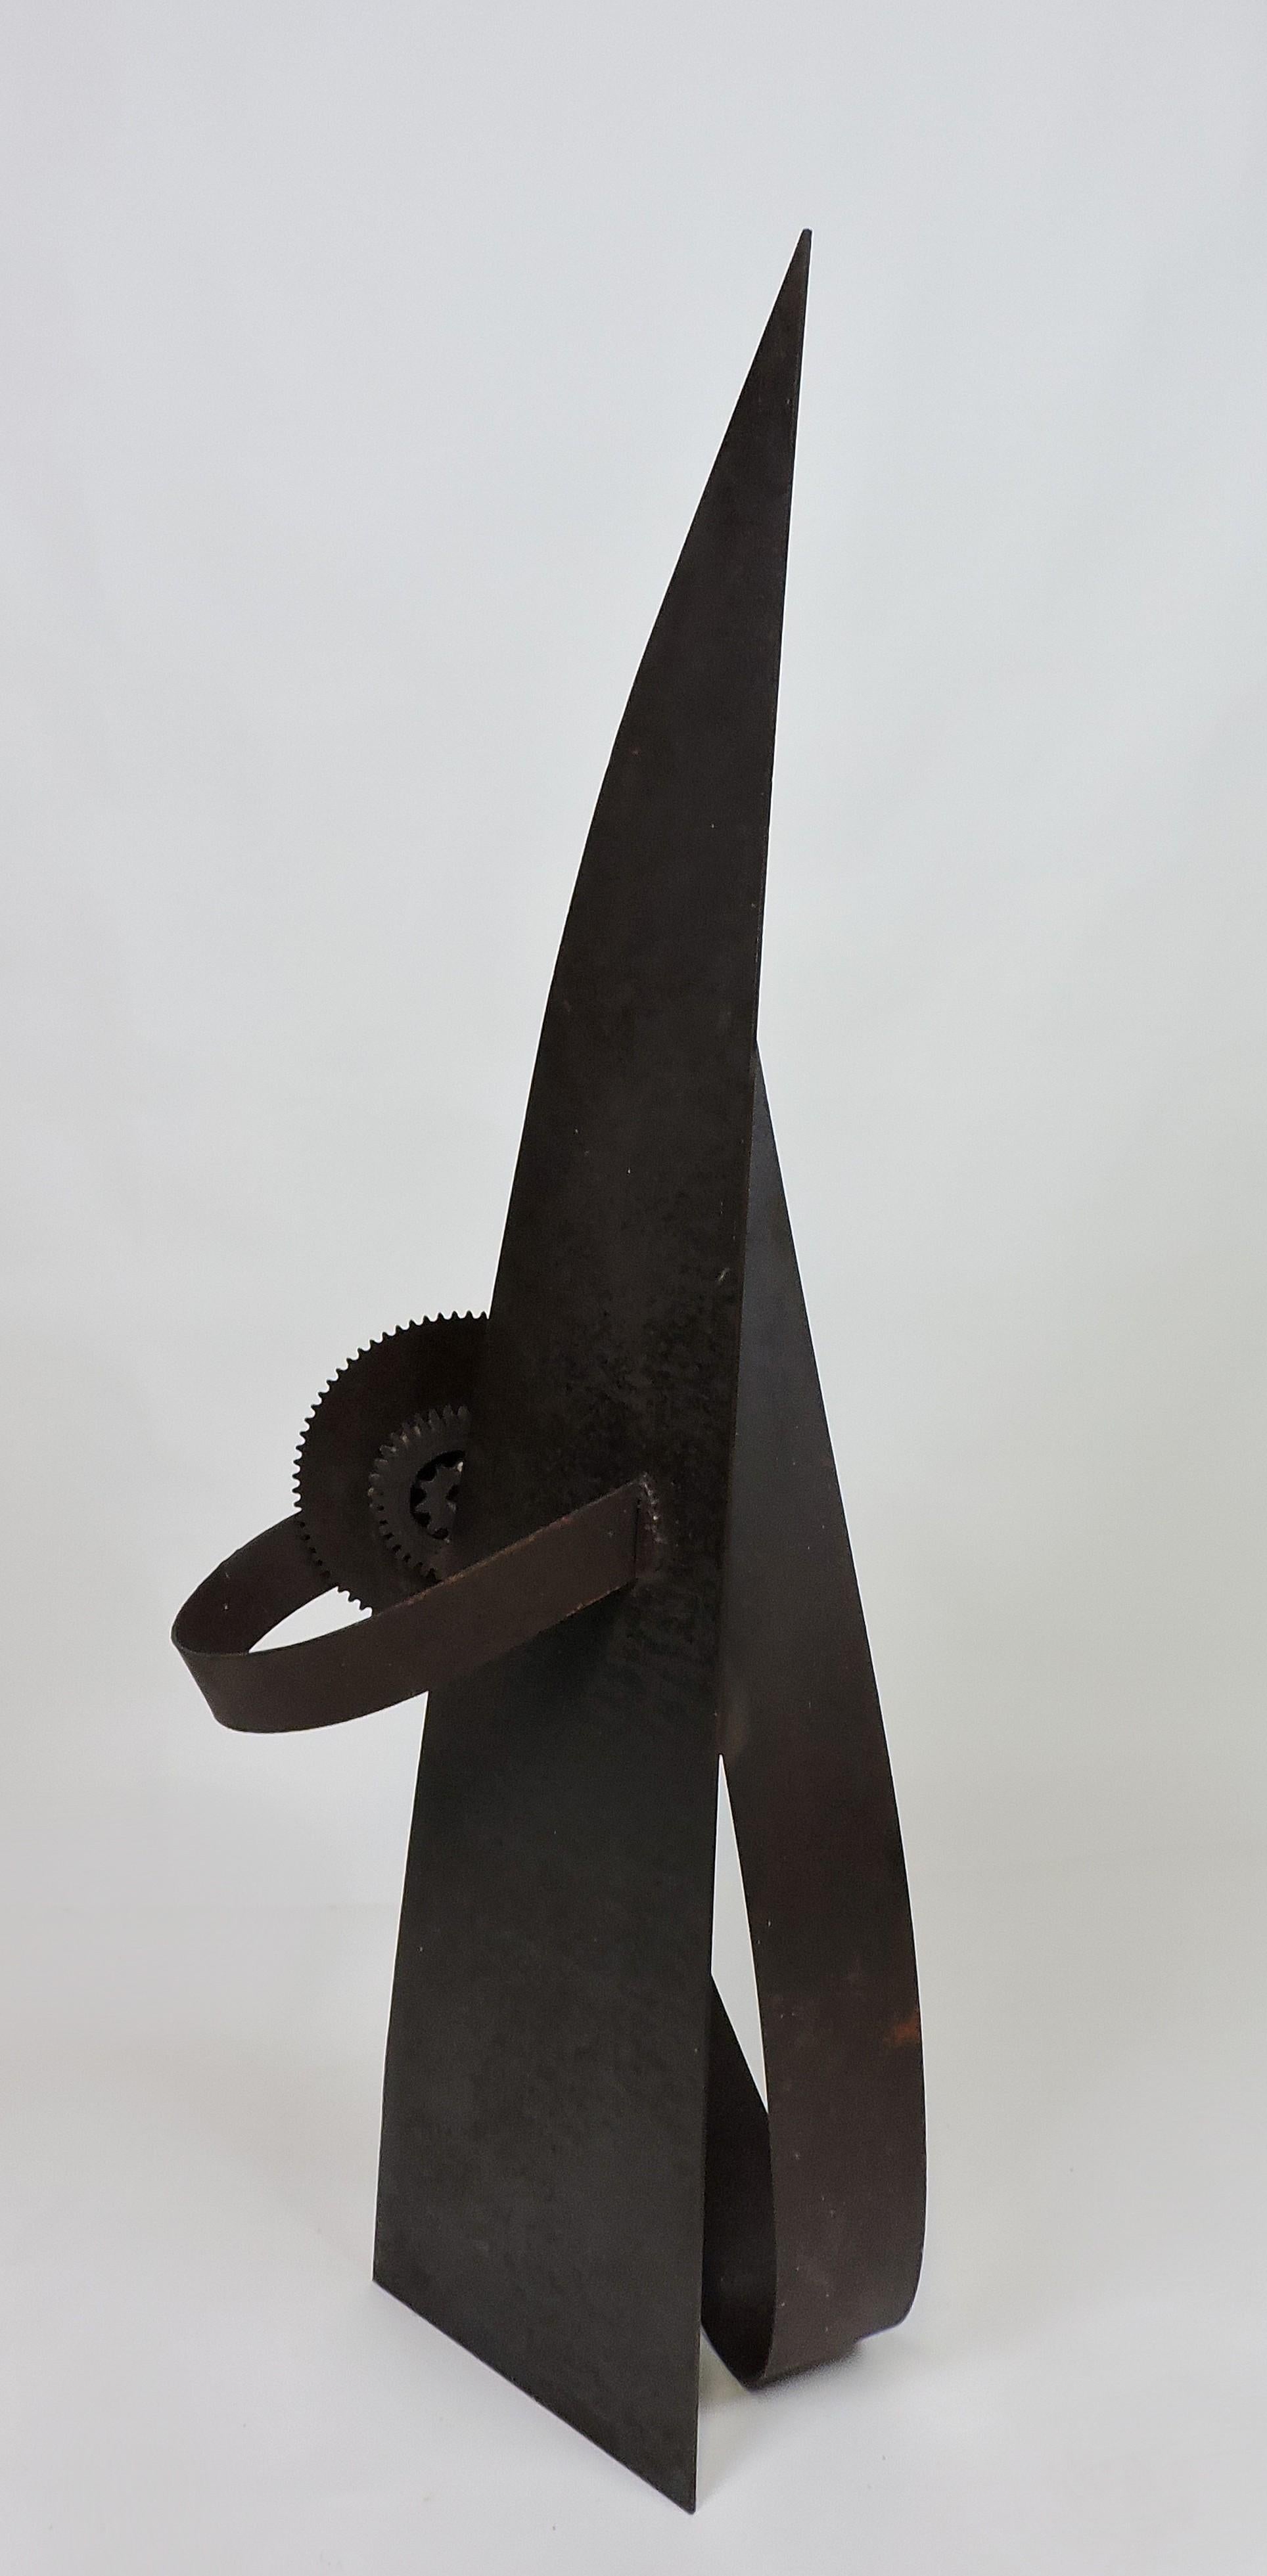 Multi-dimensional Industrial style welded steel sculpture by Philadelphia based artist David Tothero. This piece has strong graphic and textural imagery and is signed by the artist with welded DT in the lower corner. It's 54 inches high and is